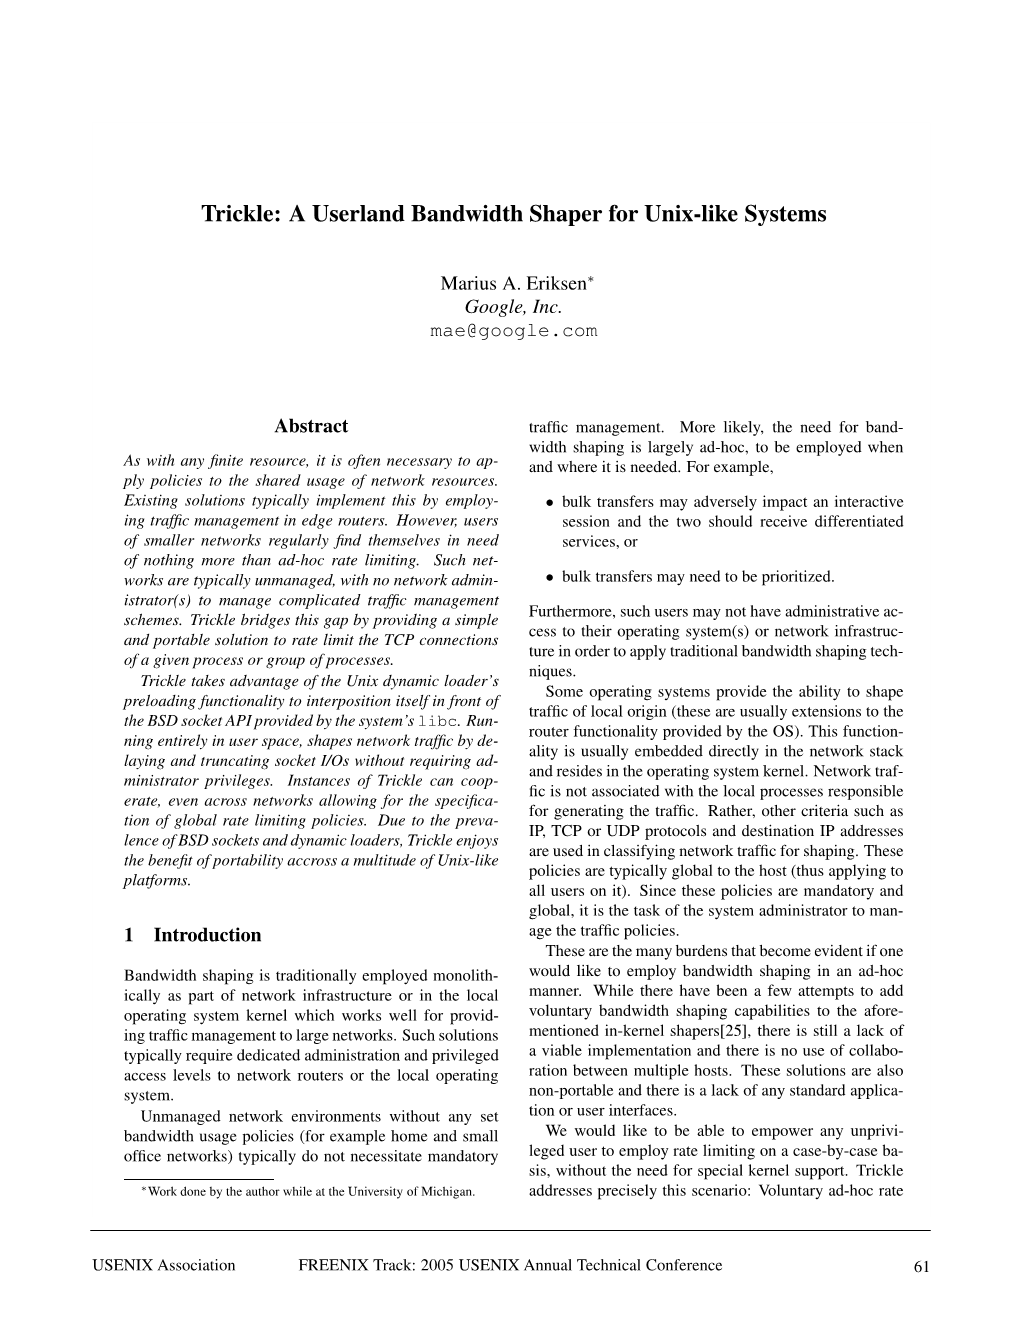 Trickle: a Userland Bandwidth Shaper for Unix-Like Systems